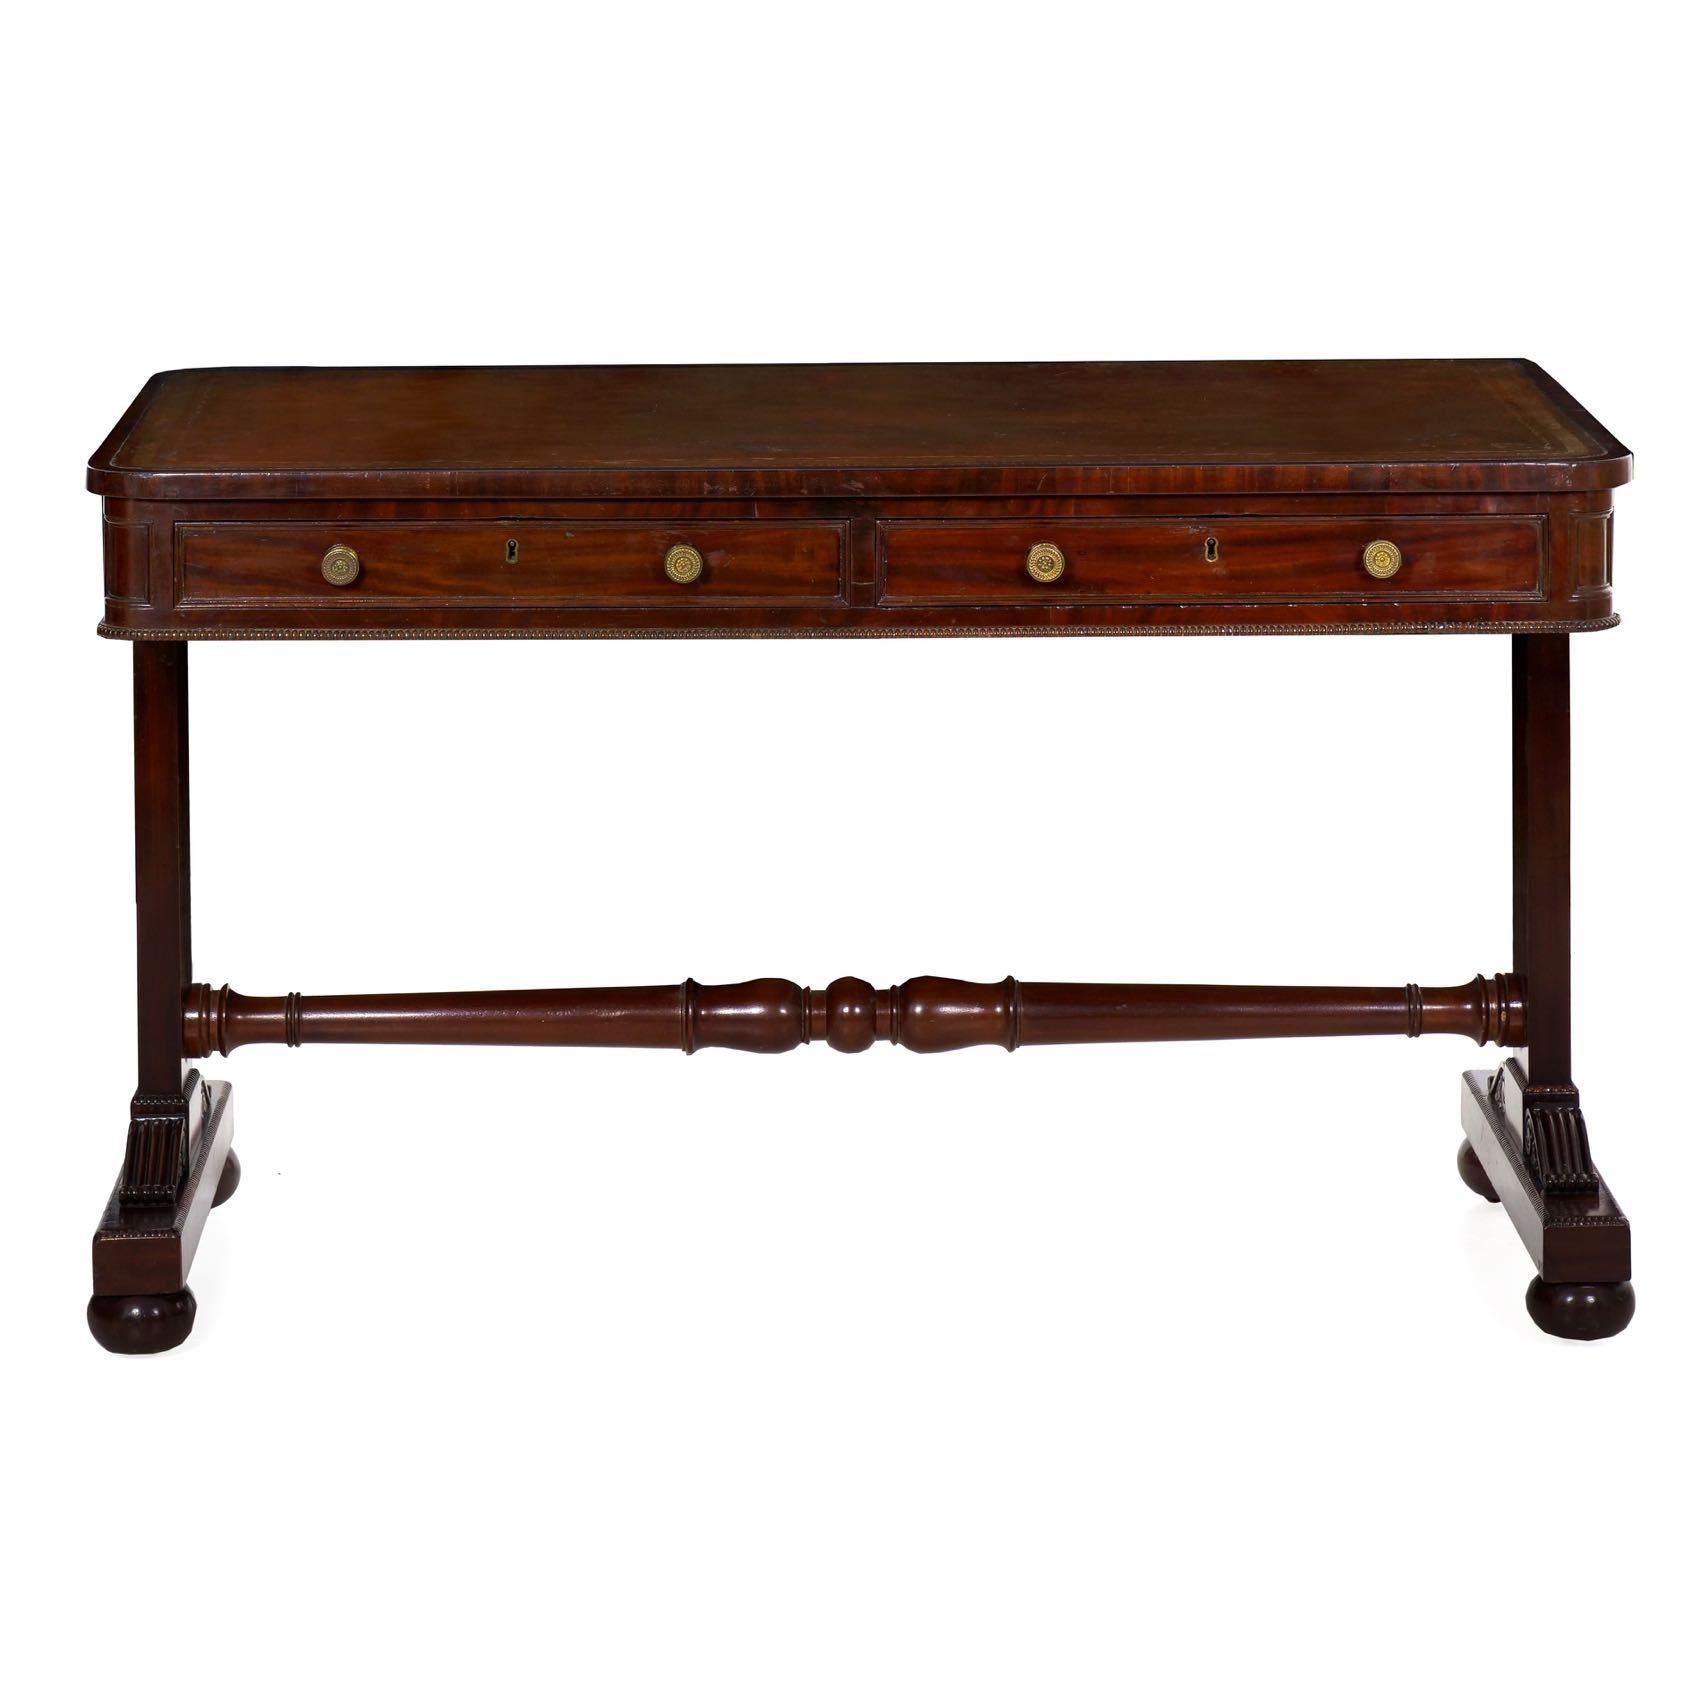 Of an attractive neoclassical form, this writing table is a product of the George IV period in England during the second quarter of the 19th century. Utilizing vibrant mahogany veneers around the top of the desk, the highlight is this beautiful